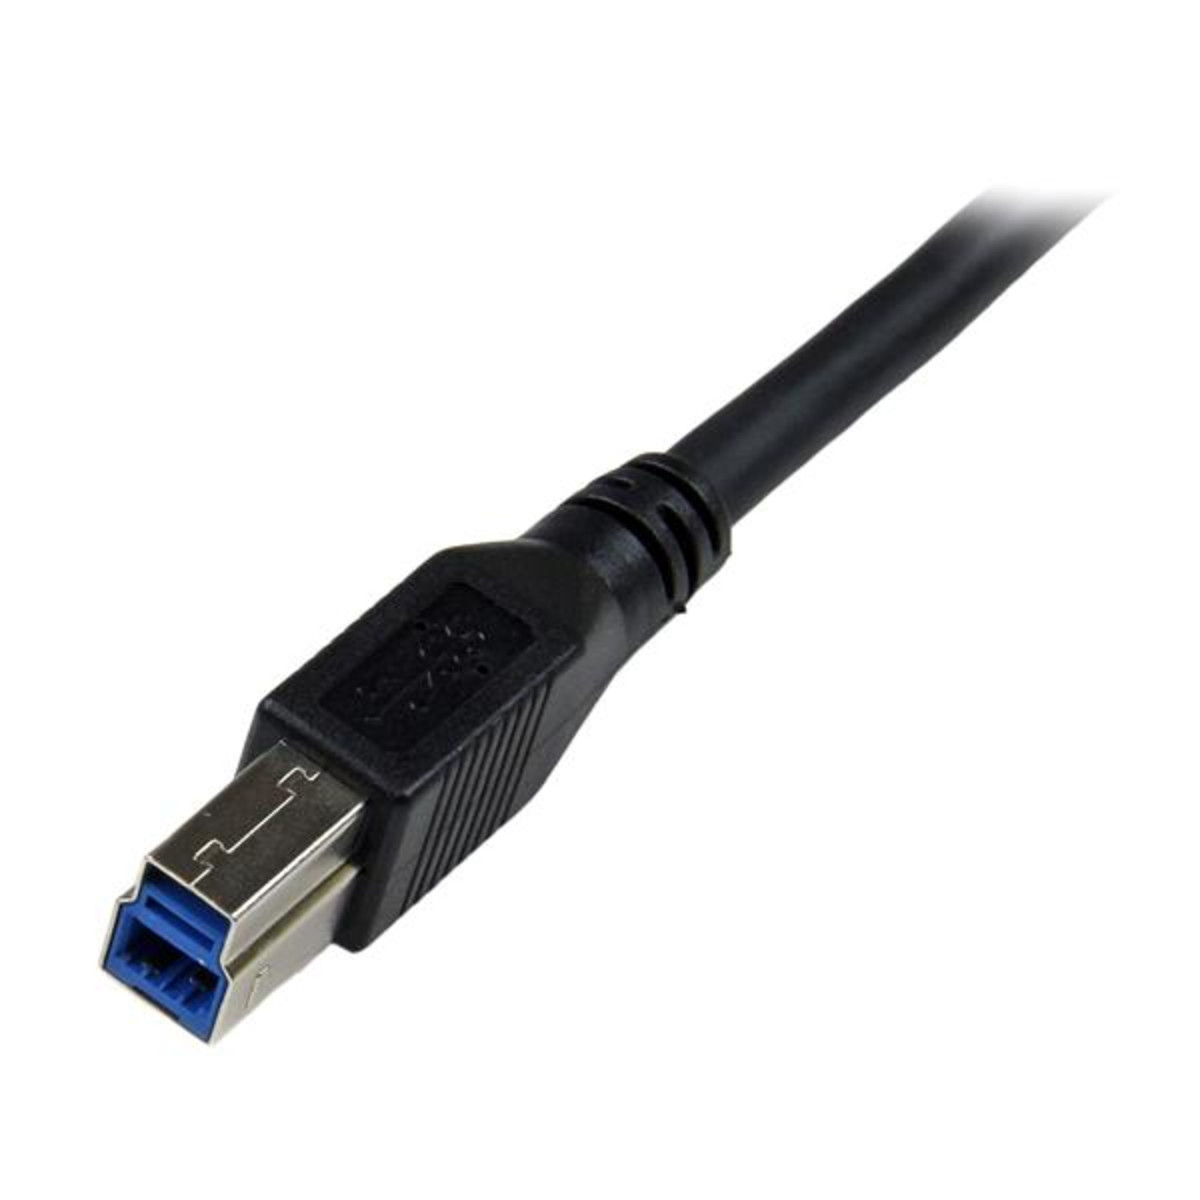 1m SuperSpeed USB 3.0 Cable